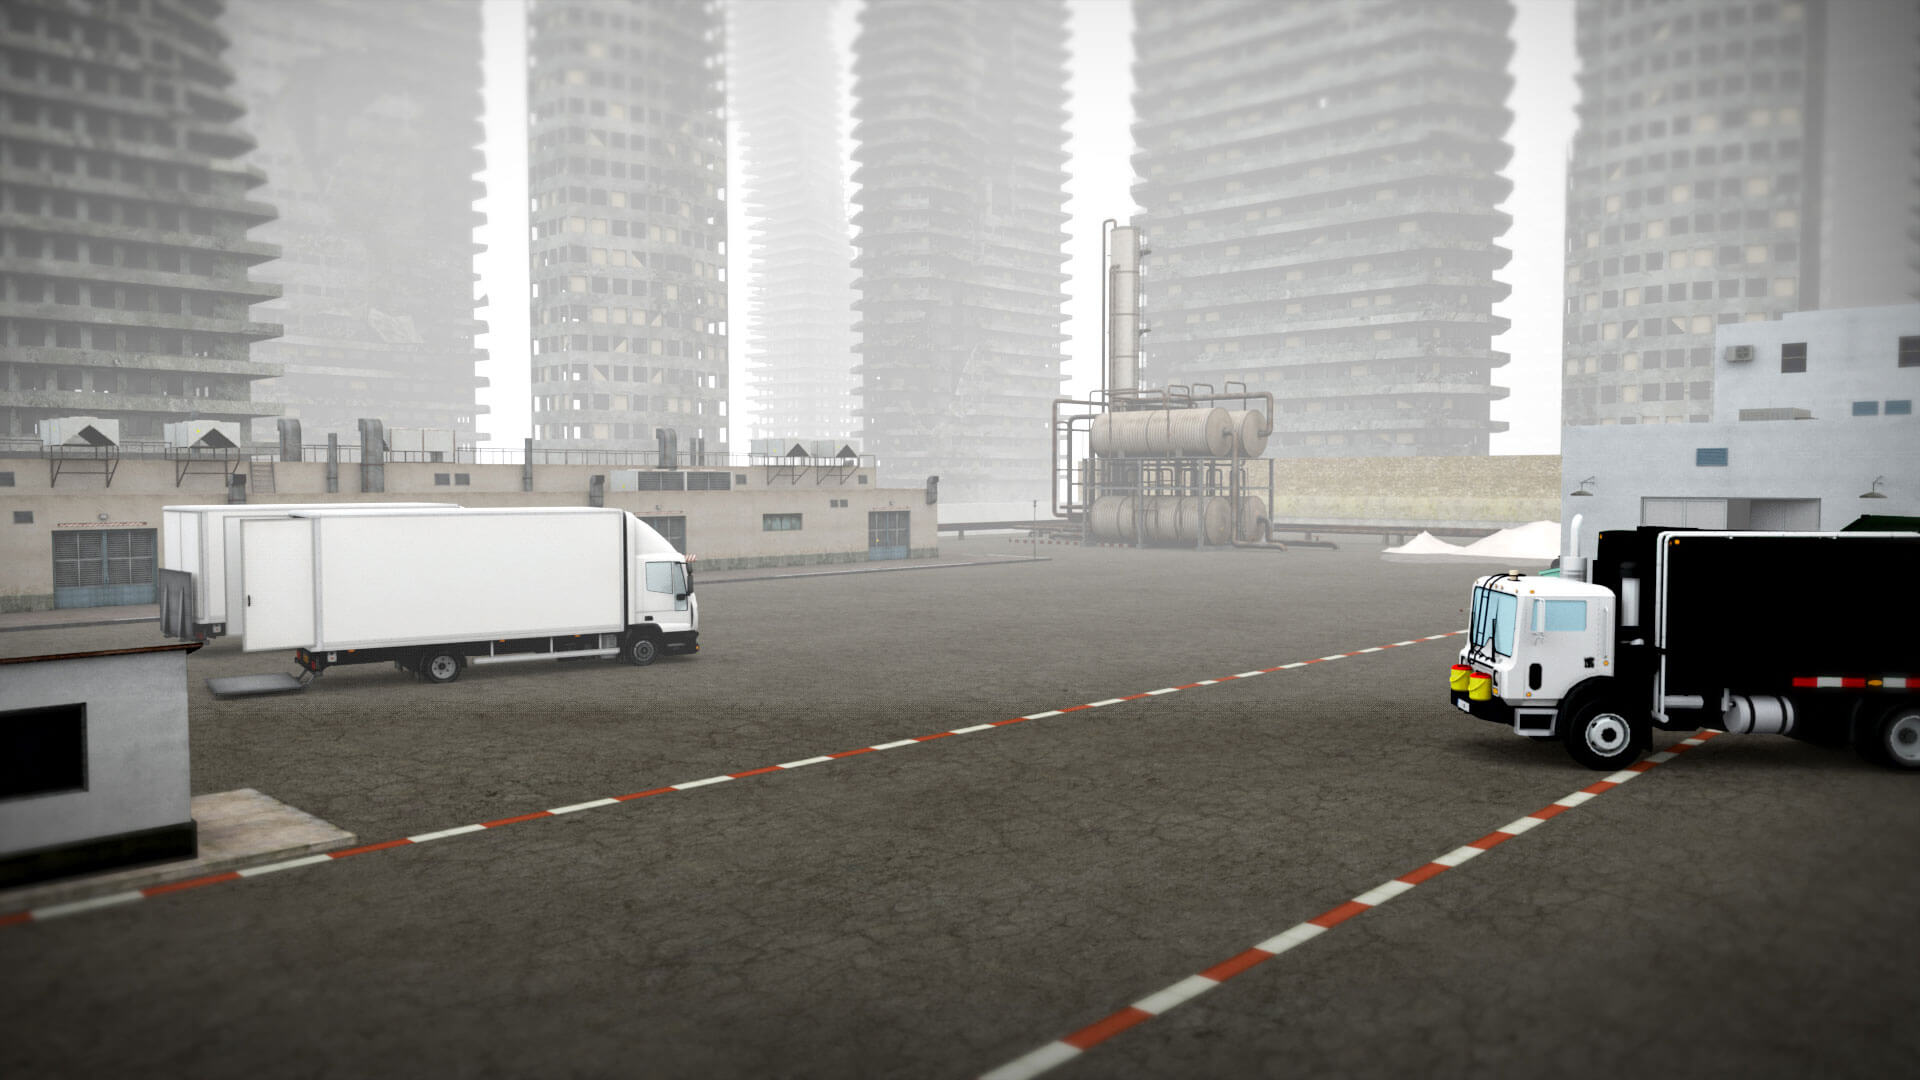 Animated polluted city with skyscrapers and lorries